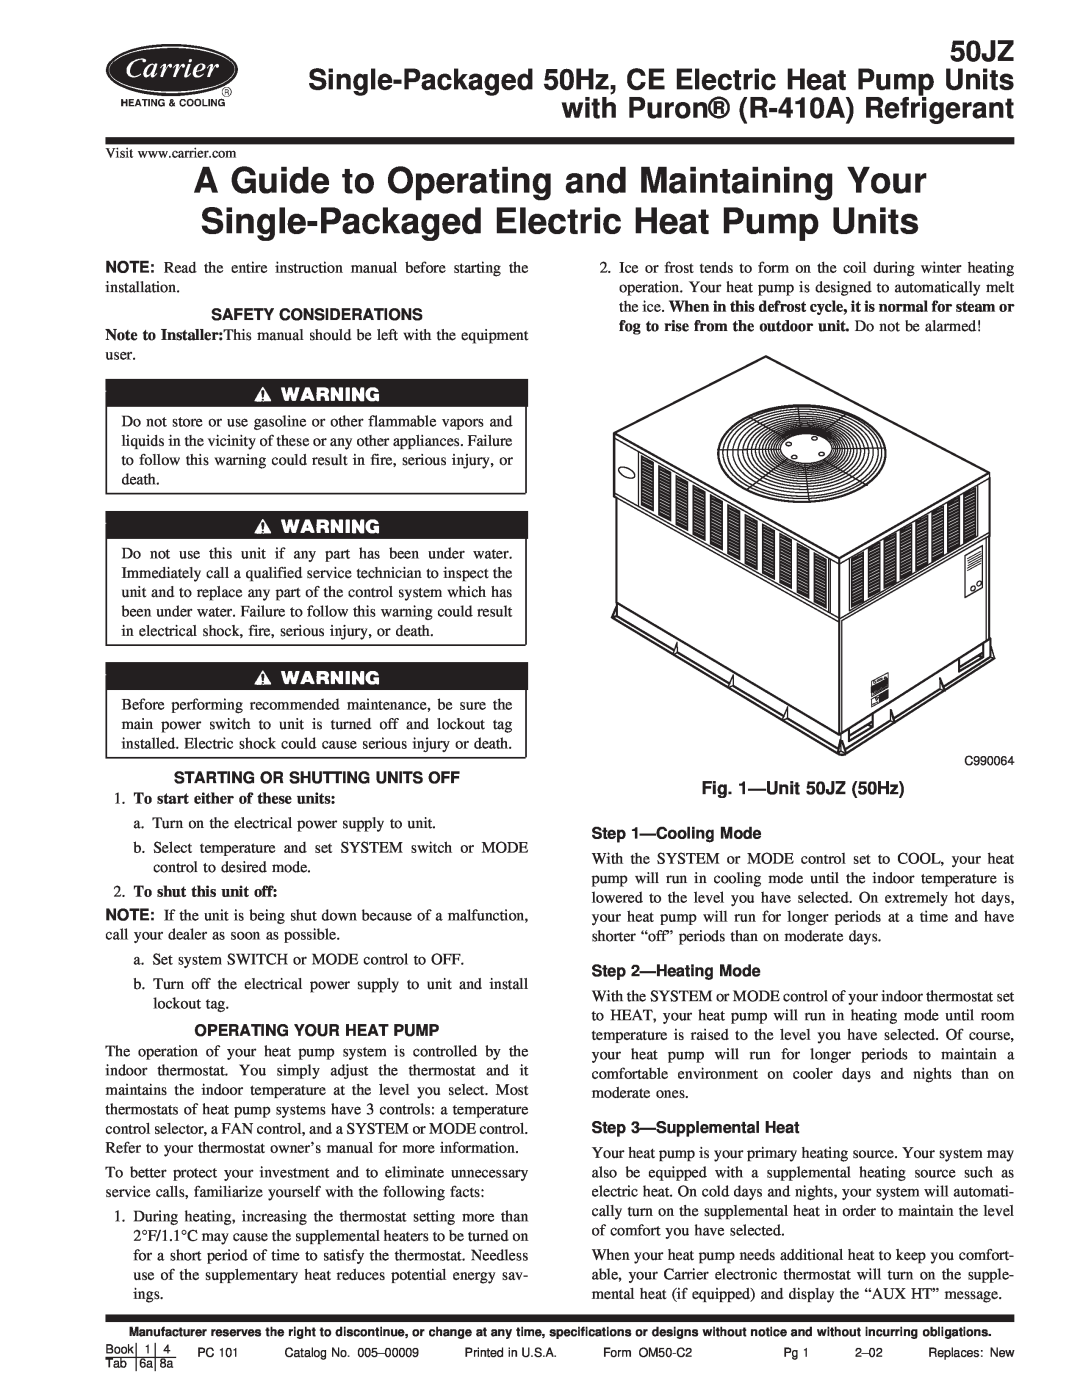 Carrier instruction manual ÐUnit 50JZ 50Hz, Safety Considerations, Starting Or Shutting Units Off, ÐCooling Mode 